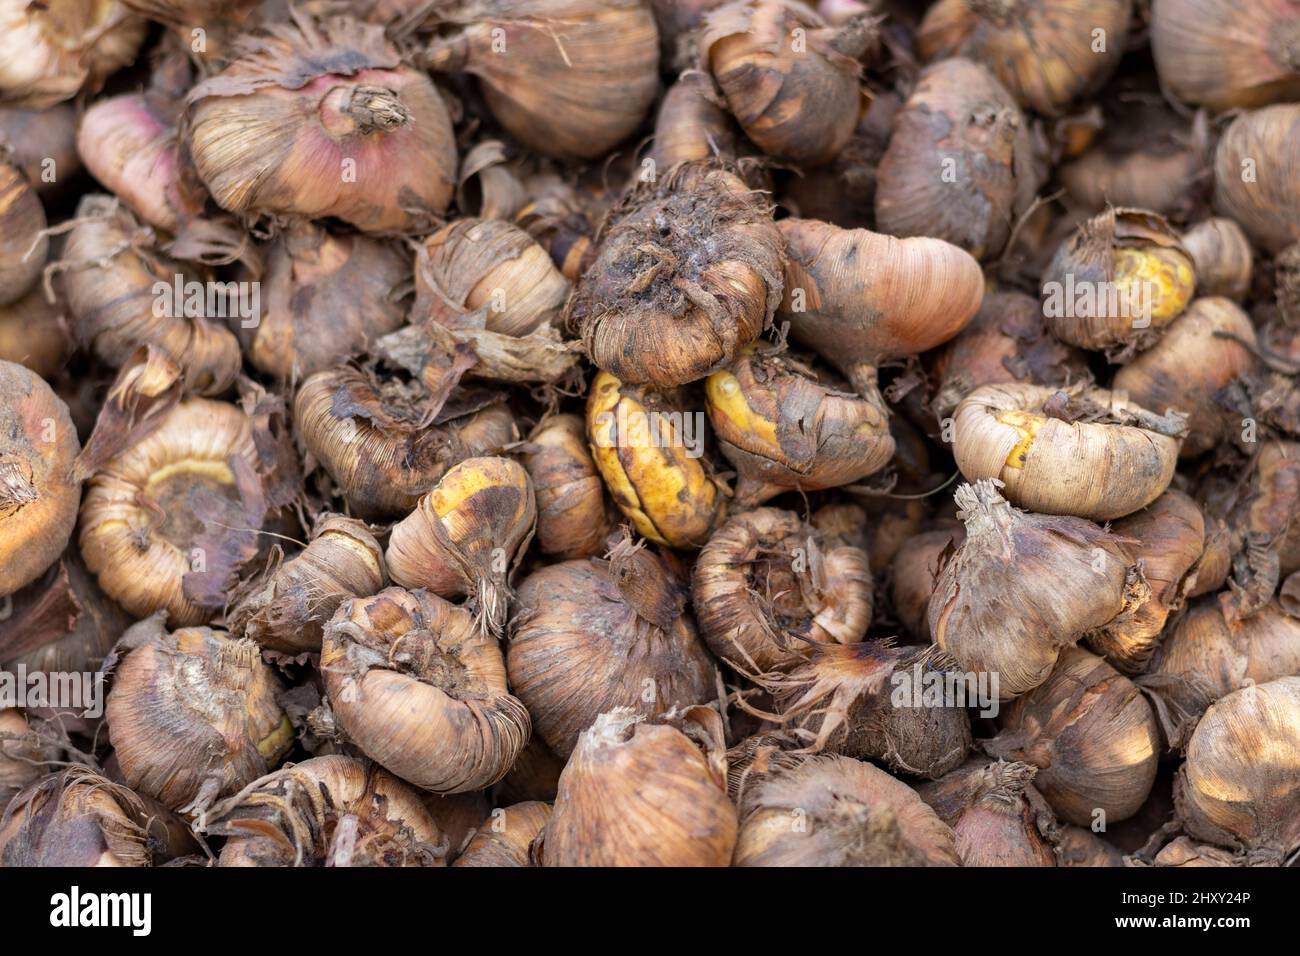 Gladiolus corms or glads seeds closeup Stock Photo